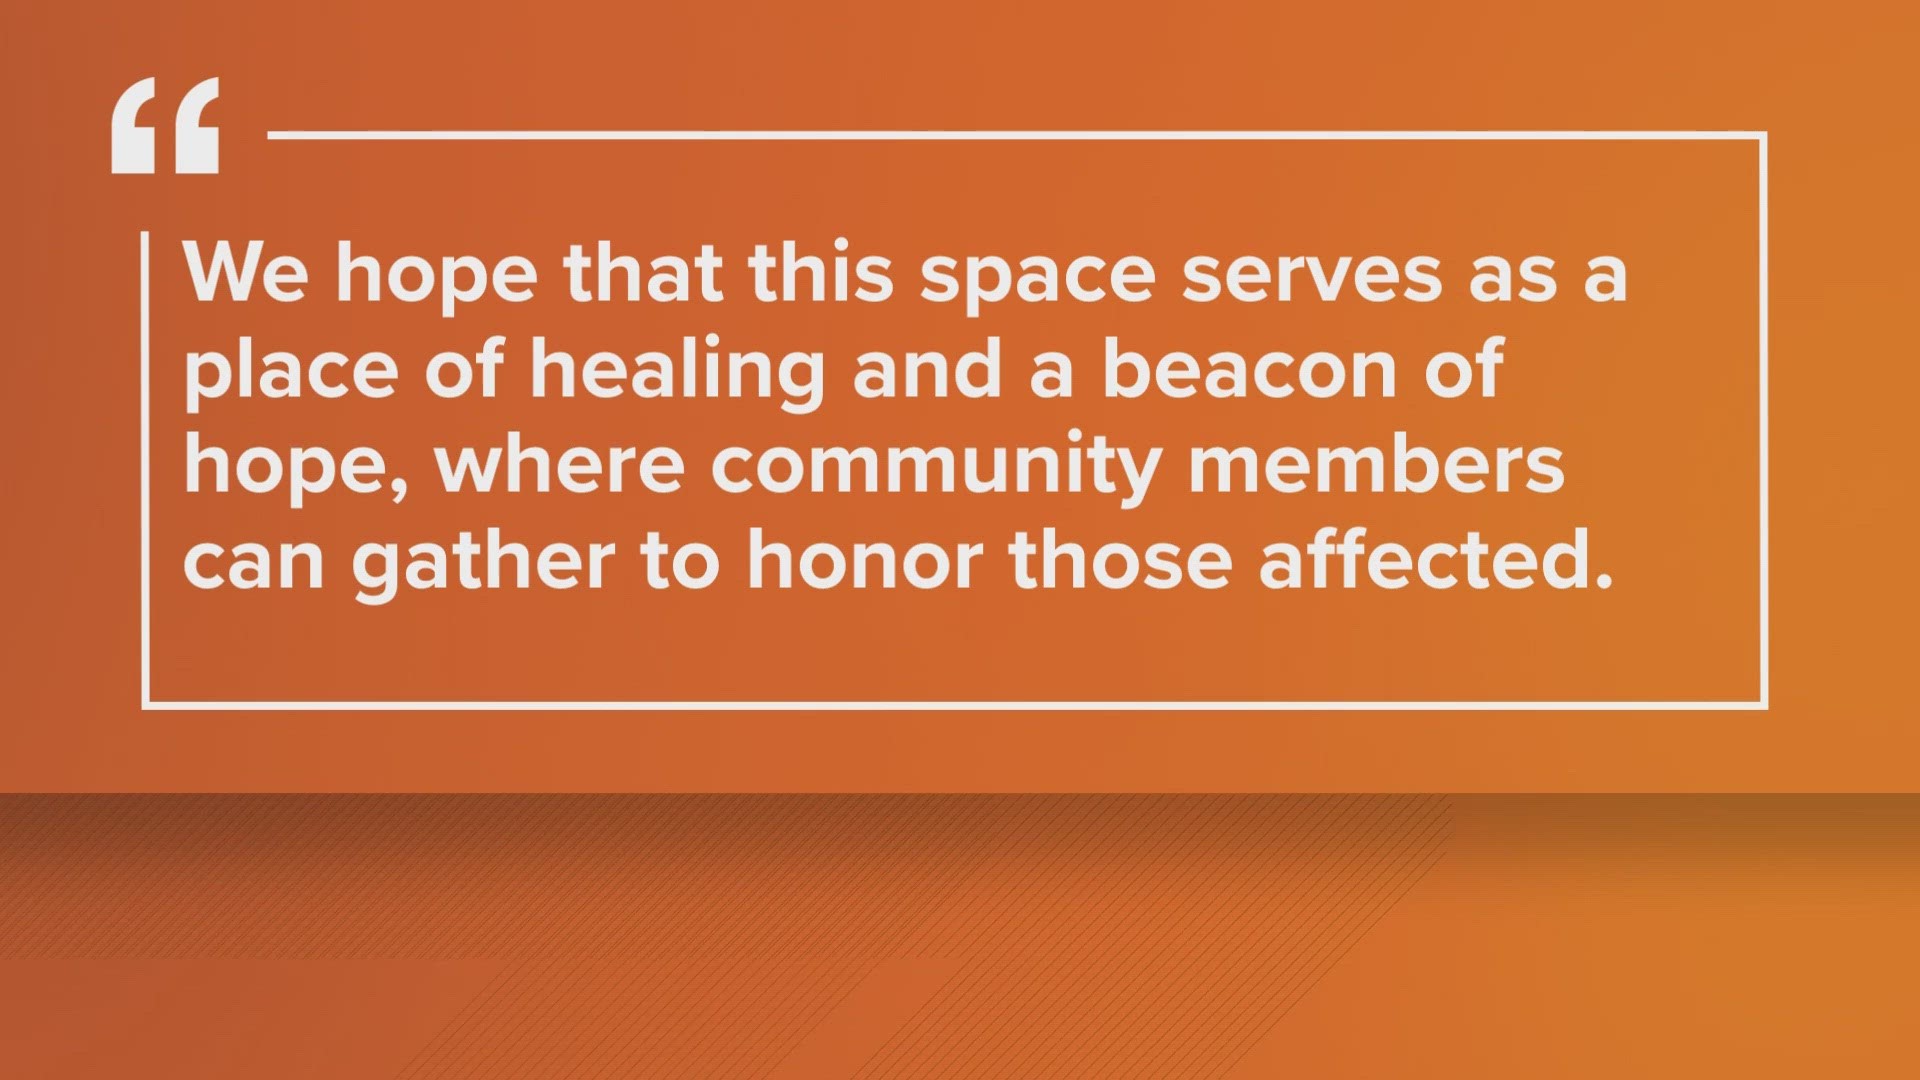 "We hope that this space serves as a place of healing and a beacon of hope," a FedEx spokesperson said in a statement.